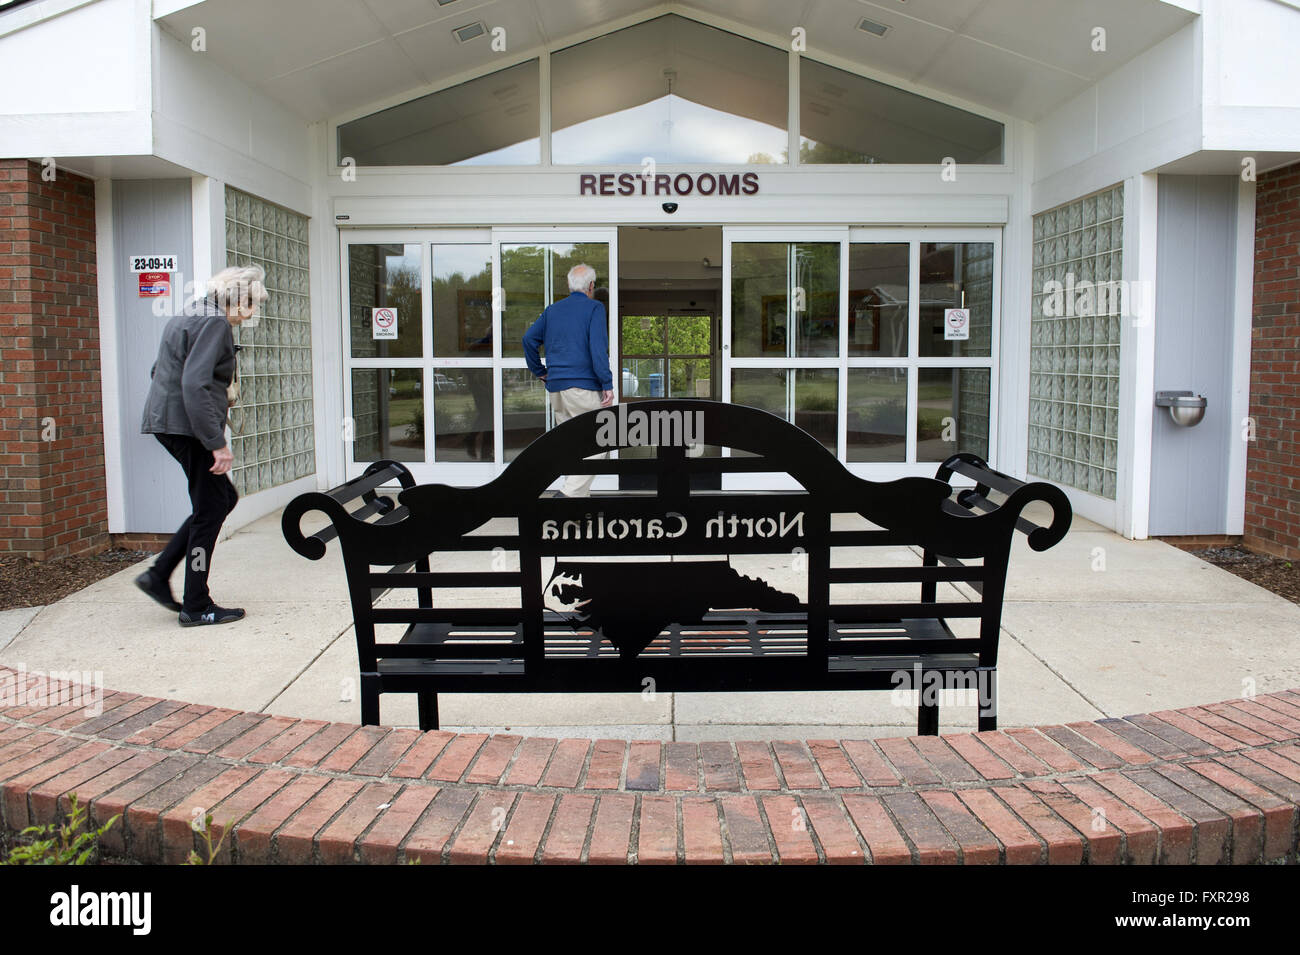 April 15, 2016 - Grover, NC - State-owned public facilities at rest stop outside Charlotte, NC. The state's recent anti-LGBT laws, dubbed 'bathroom bill' restricts transgender individuals from using what many residents in state feel would be the appropriate gendered restroom to use depending on the person's gender identity and presentation. The law has unleashed a firestorm of protests against the law, including jobs and lost business growth in the state. (Credit Image: © Robin Rayne Nelson via ZUMA Wire) Stock Photo